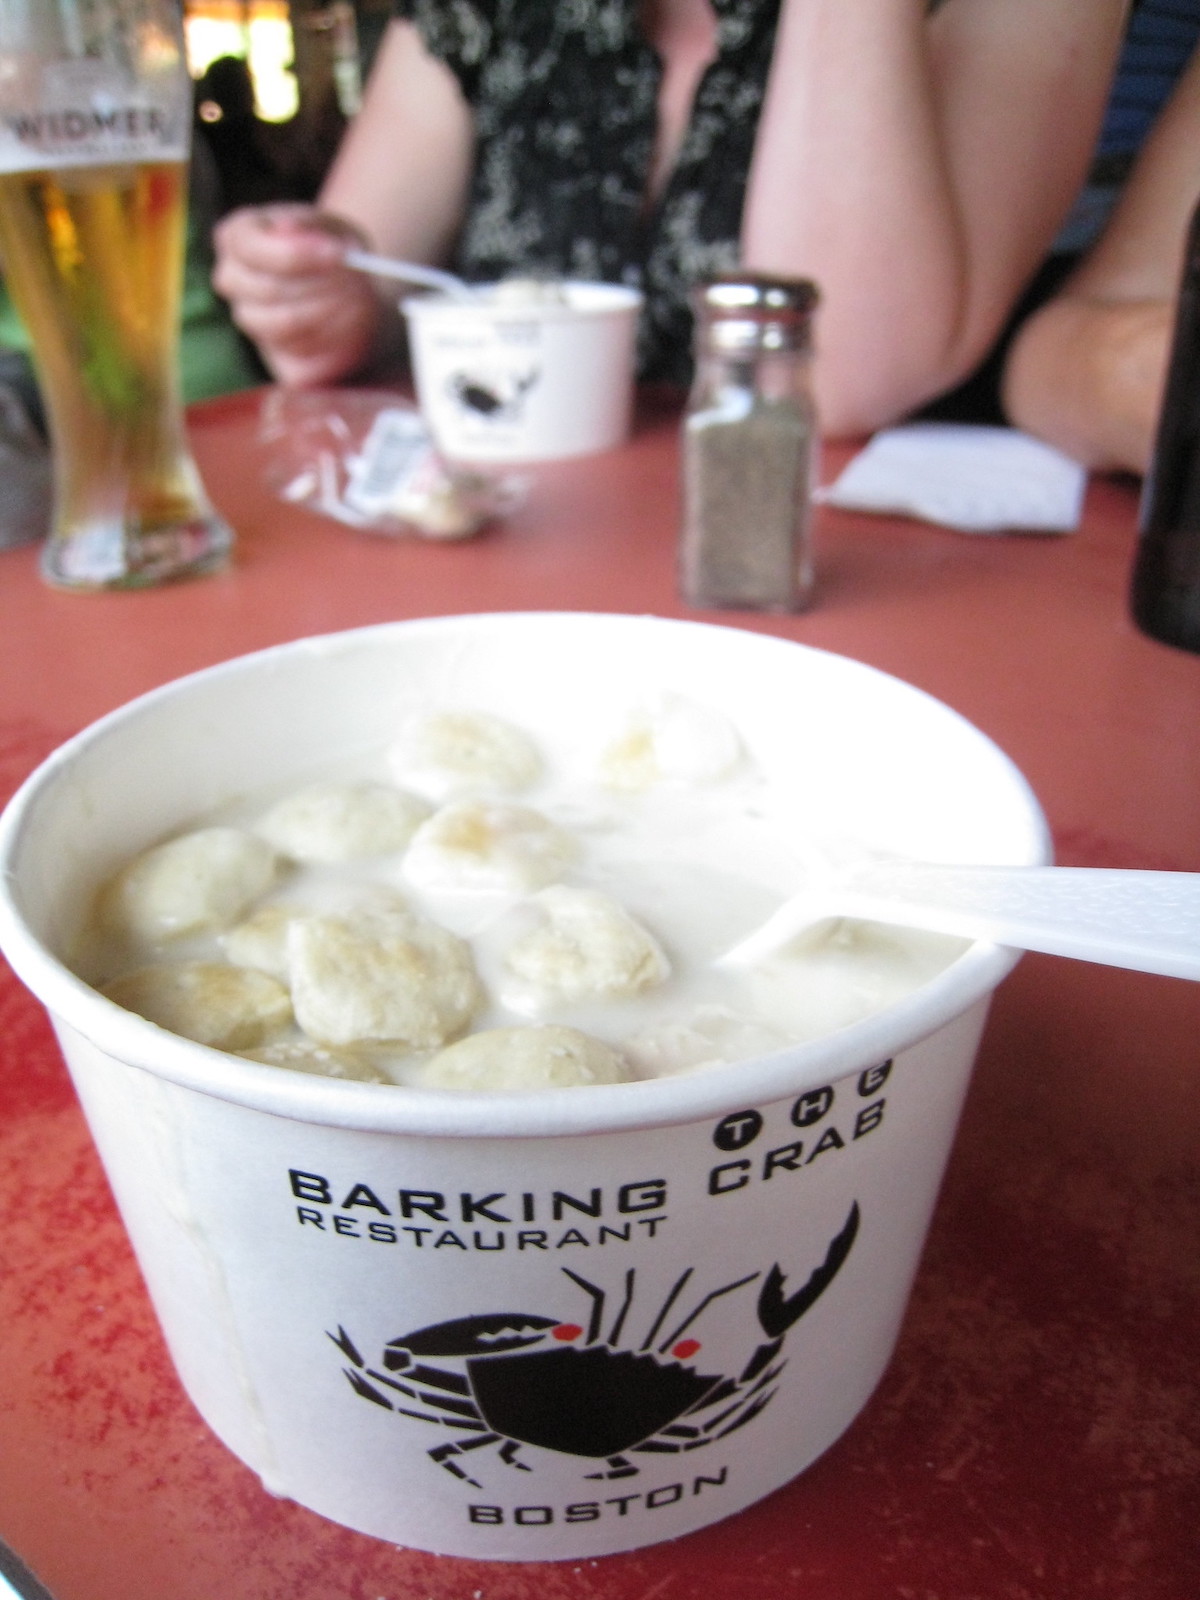 Close up of a paper cup filled with clam chowder and topped with oyster crackers